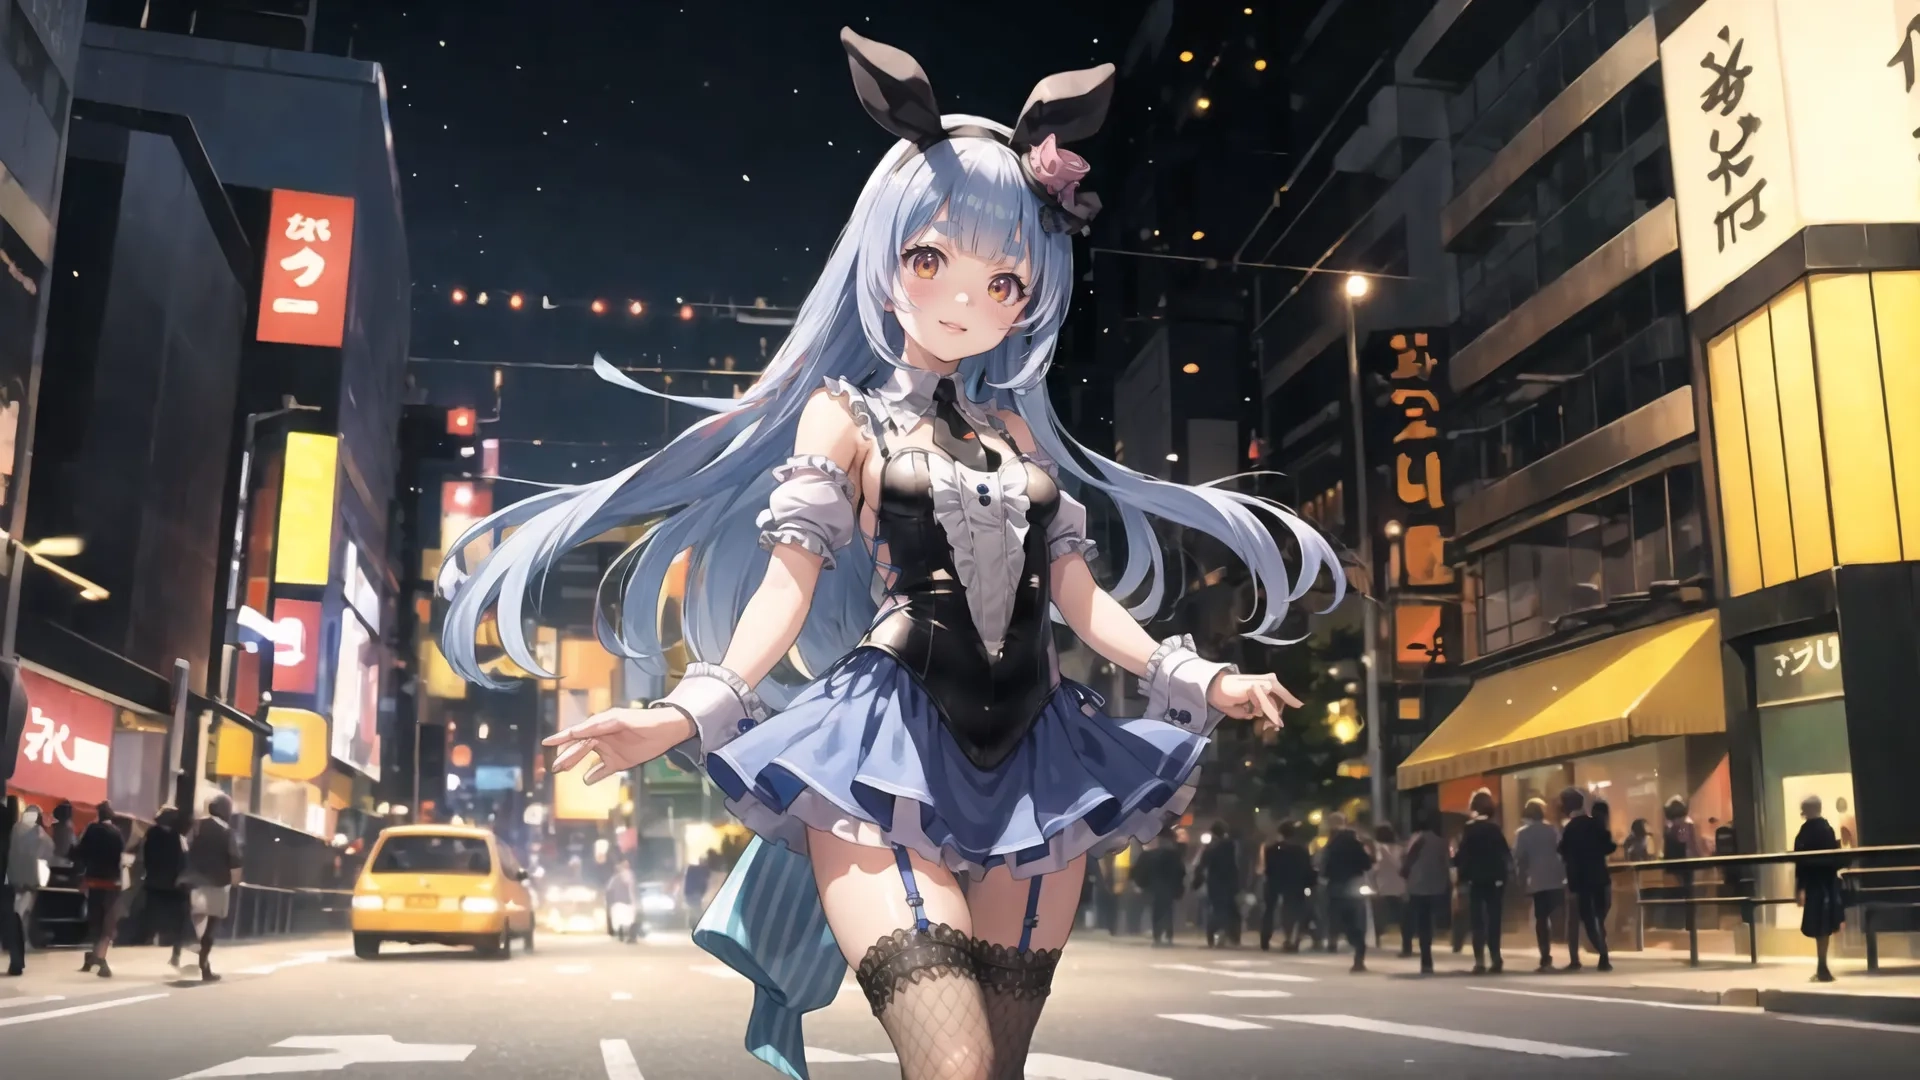 she stands in the middle of a busy city street while wearing bunny ears and stockings to show off her amazing clothes and accessories while in motion
